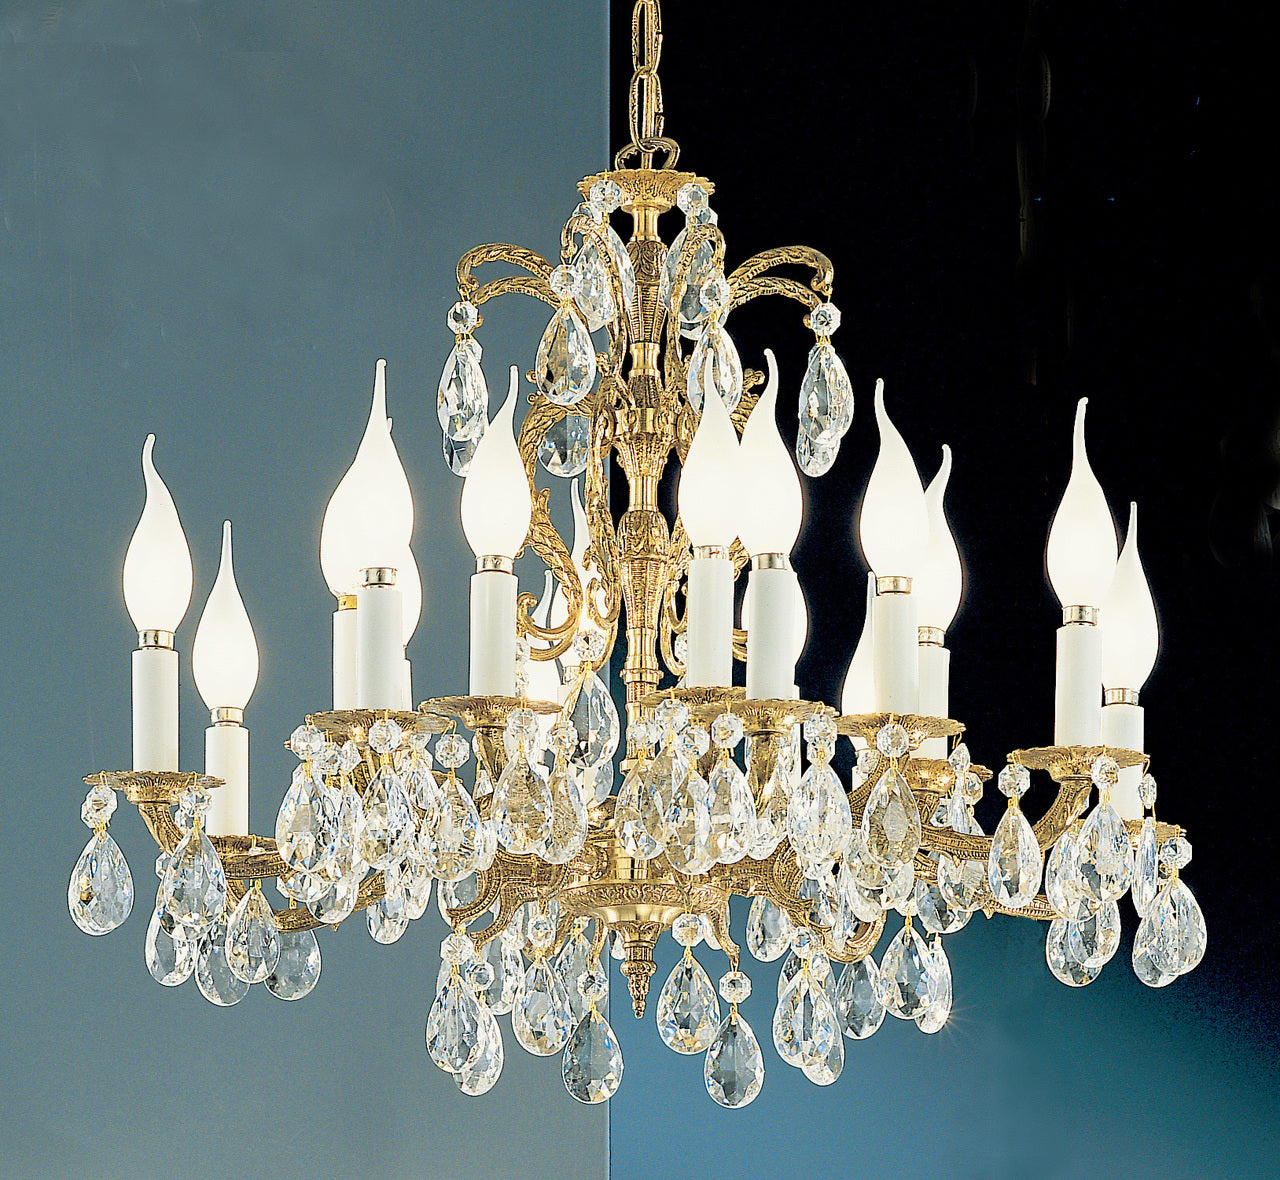 Classic Lighting 5216 OWB S Barcelona Crystal/Cast Brass Chandelier in Olde World Bronze (Imported from Spain)